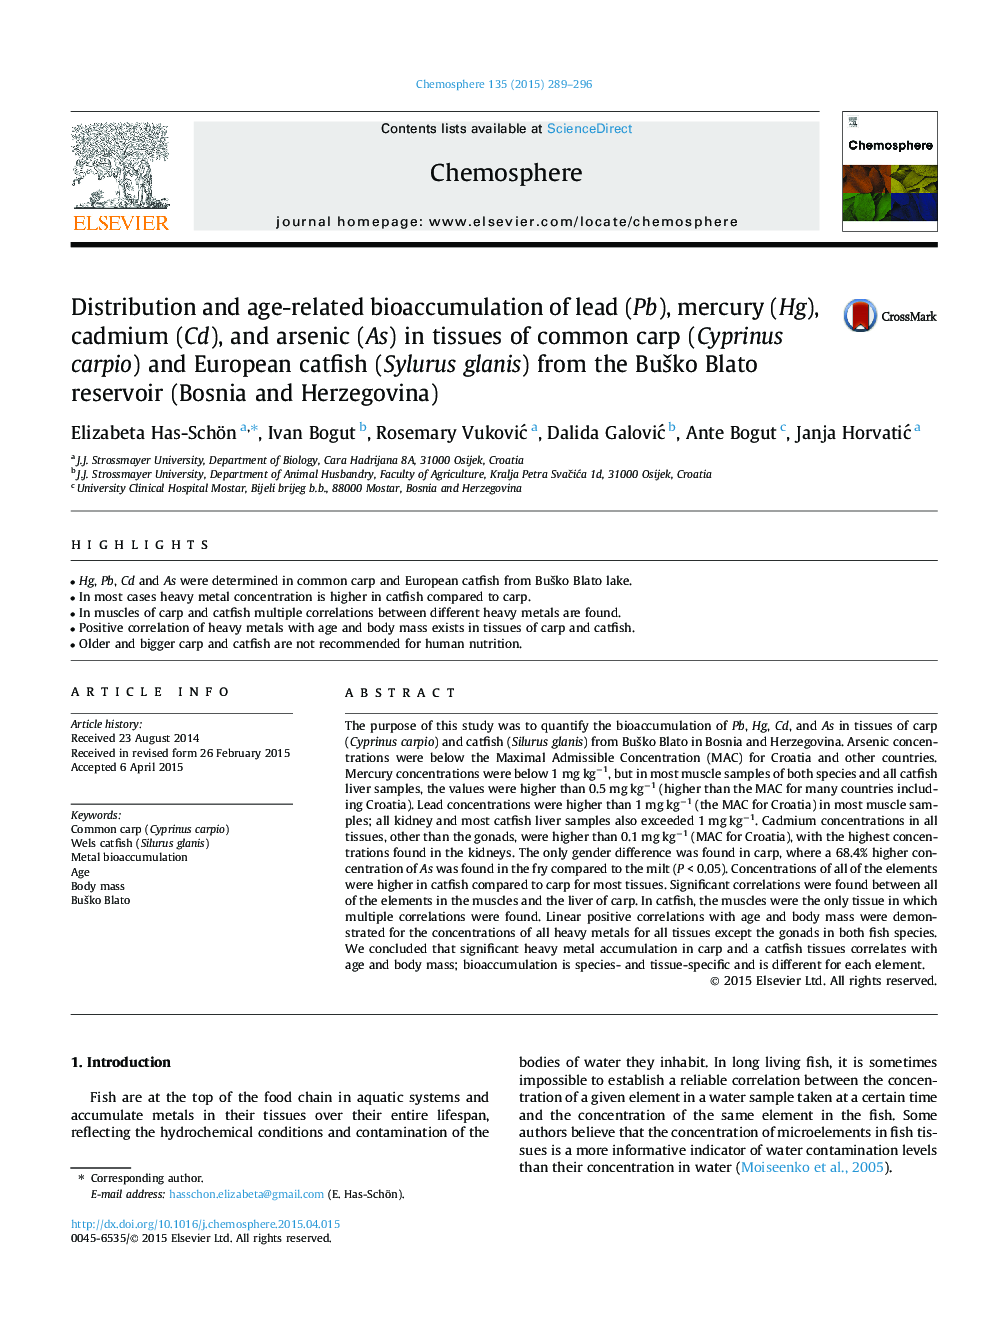 Distribution and age-related bioaccumulation of lead (Pb), mercury (Hg), cadmium (Cd), and arsenic (As) in tissues of common carp (Cyprinus carpio) and European catfish (Sylurus glanis) from the BuÅ¡ko Blato reservoir (Bosnia and Herzegovina)